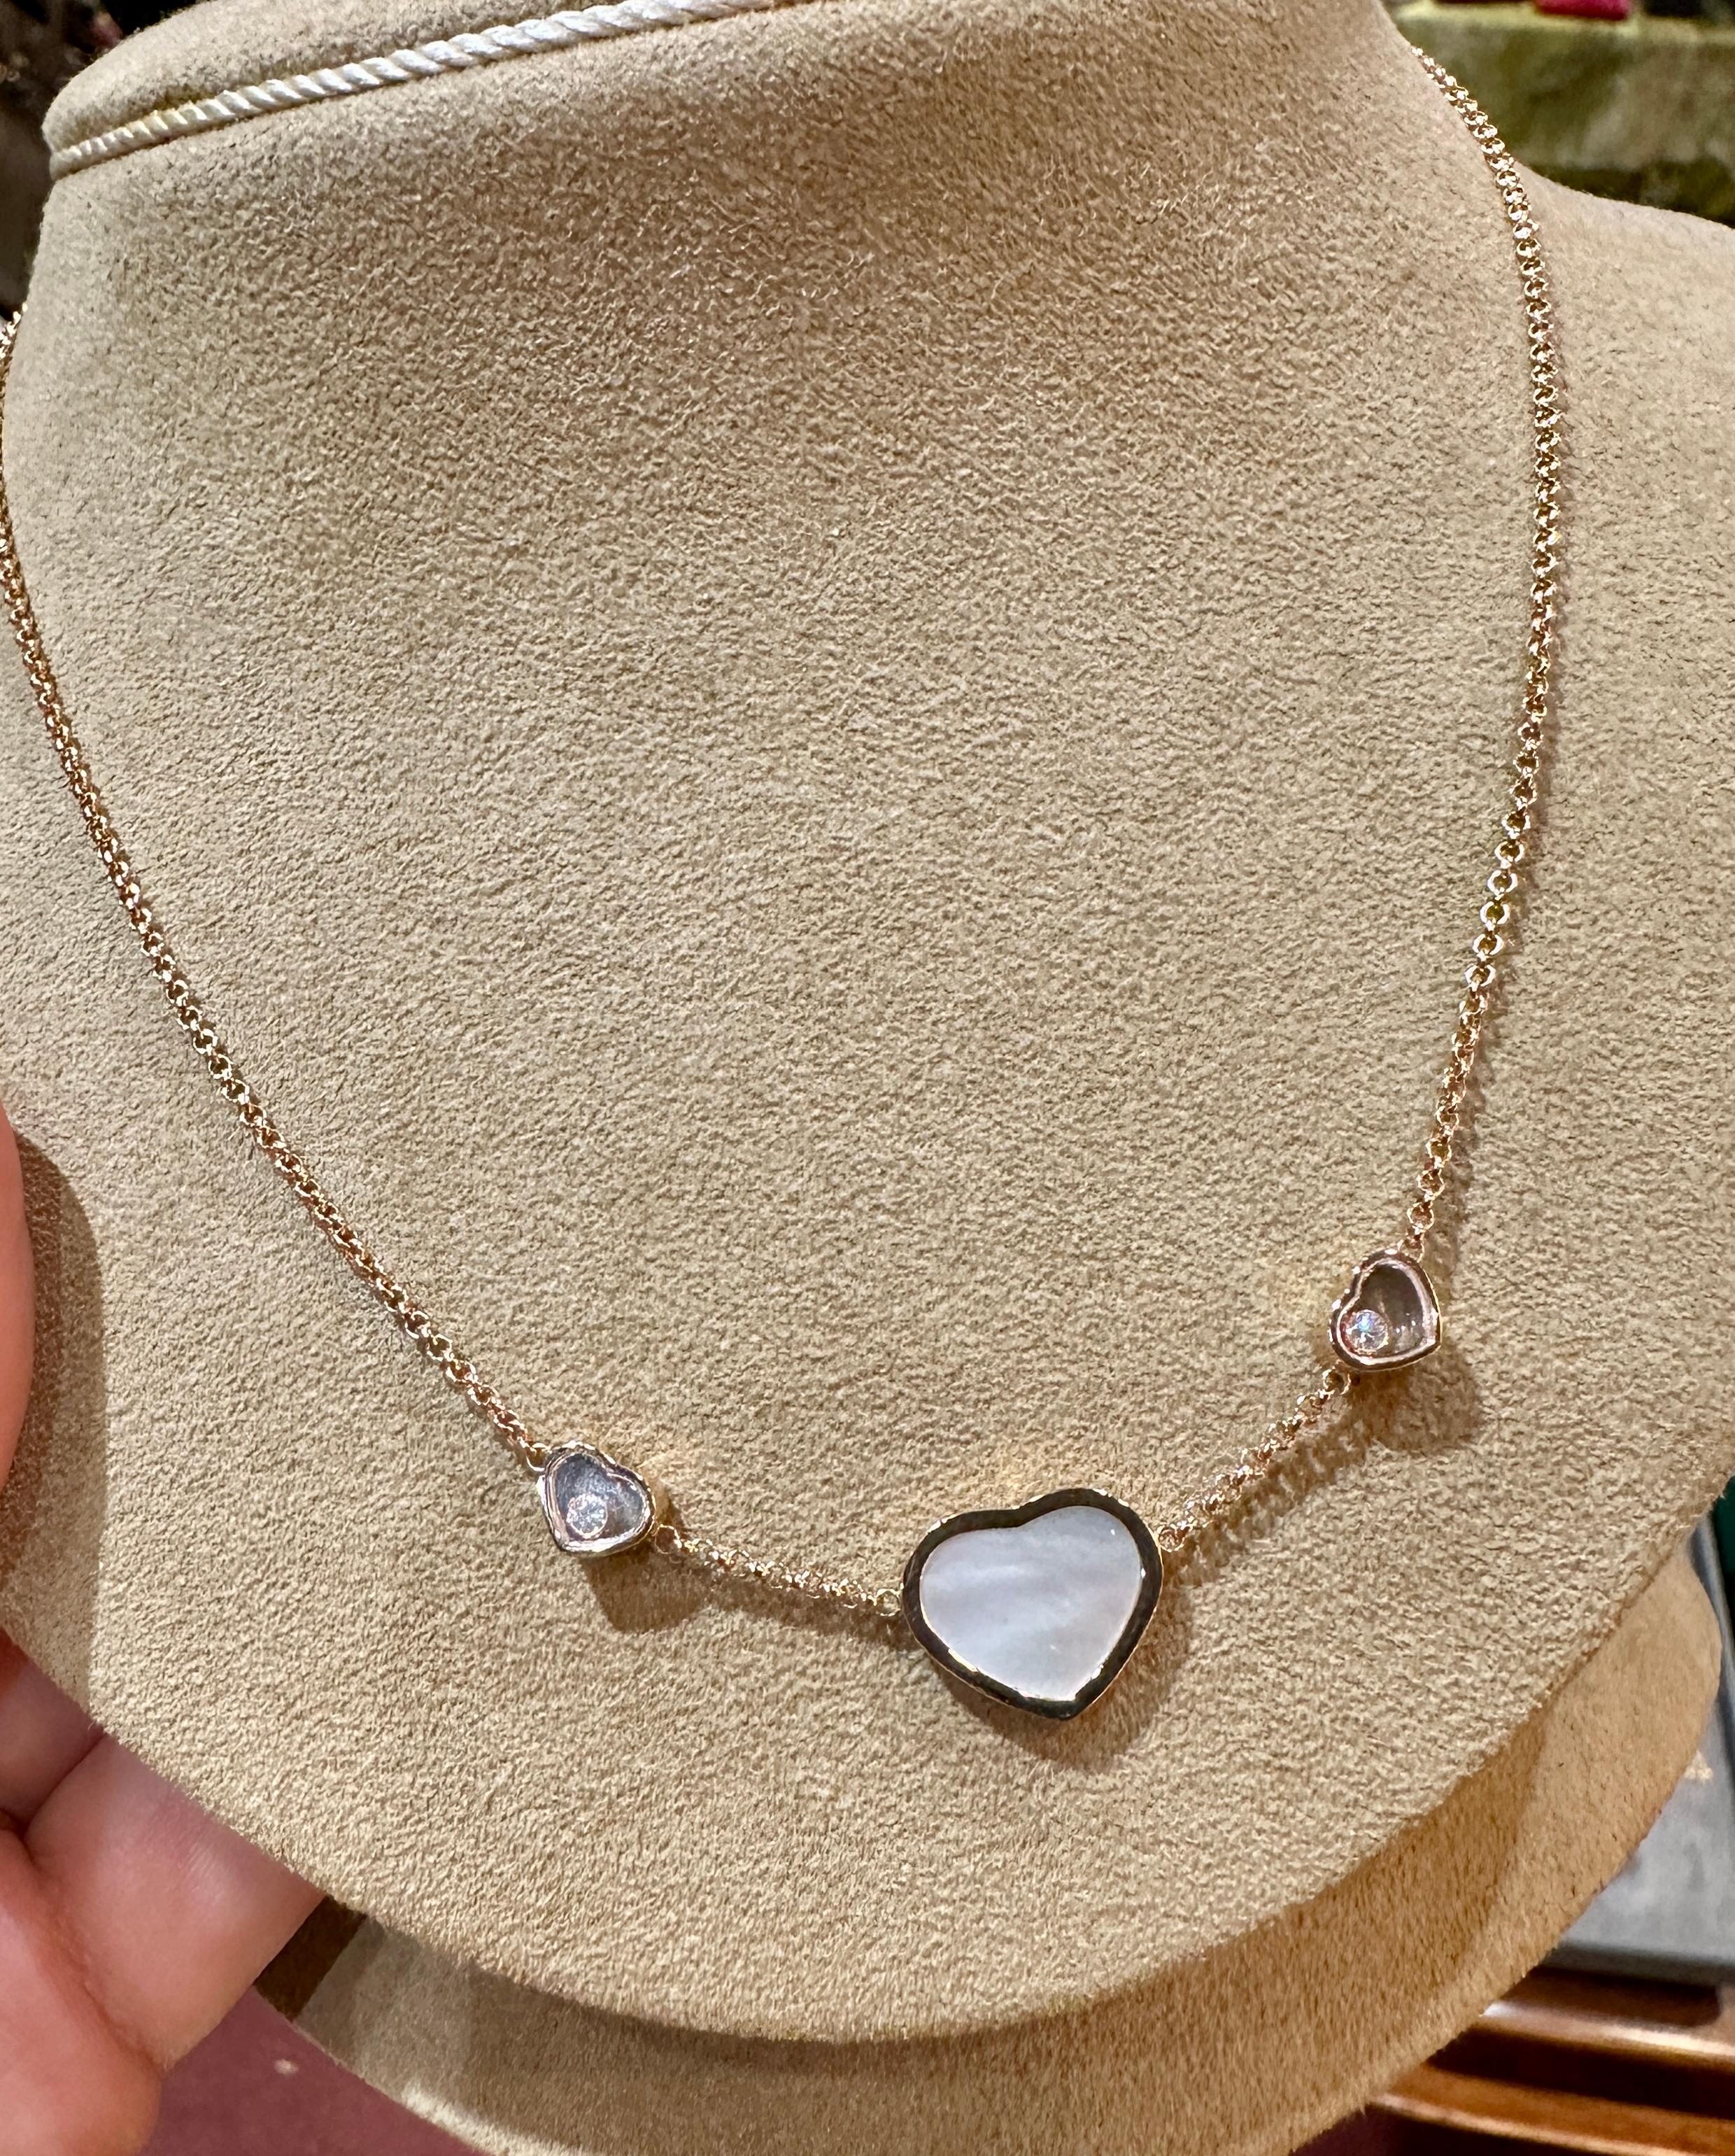 Chopard's 'Happy Hearts' collection reflects on the brand's dedication to generosity, whether to a loved one or yourself - no matter who the recipient is, this necklace is an affirmation of love. Cast from 18-karat rose gold, it's strung with a